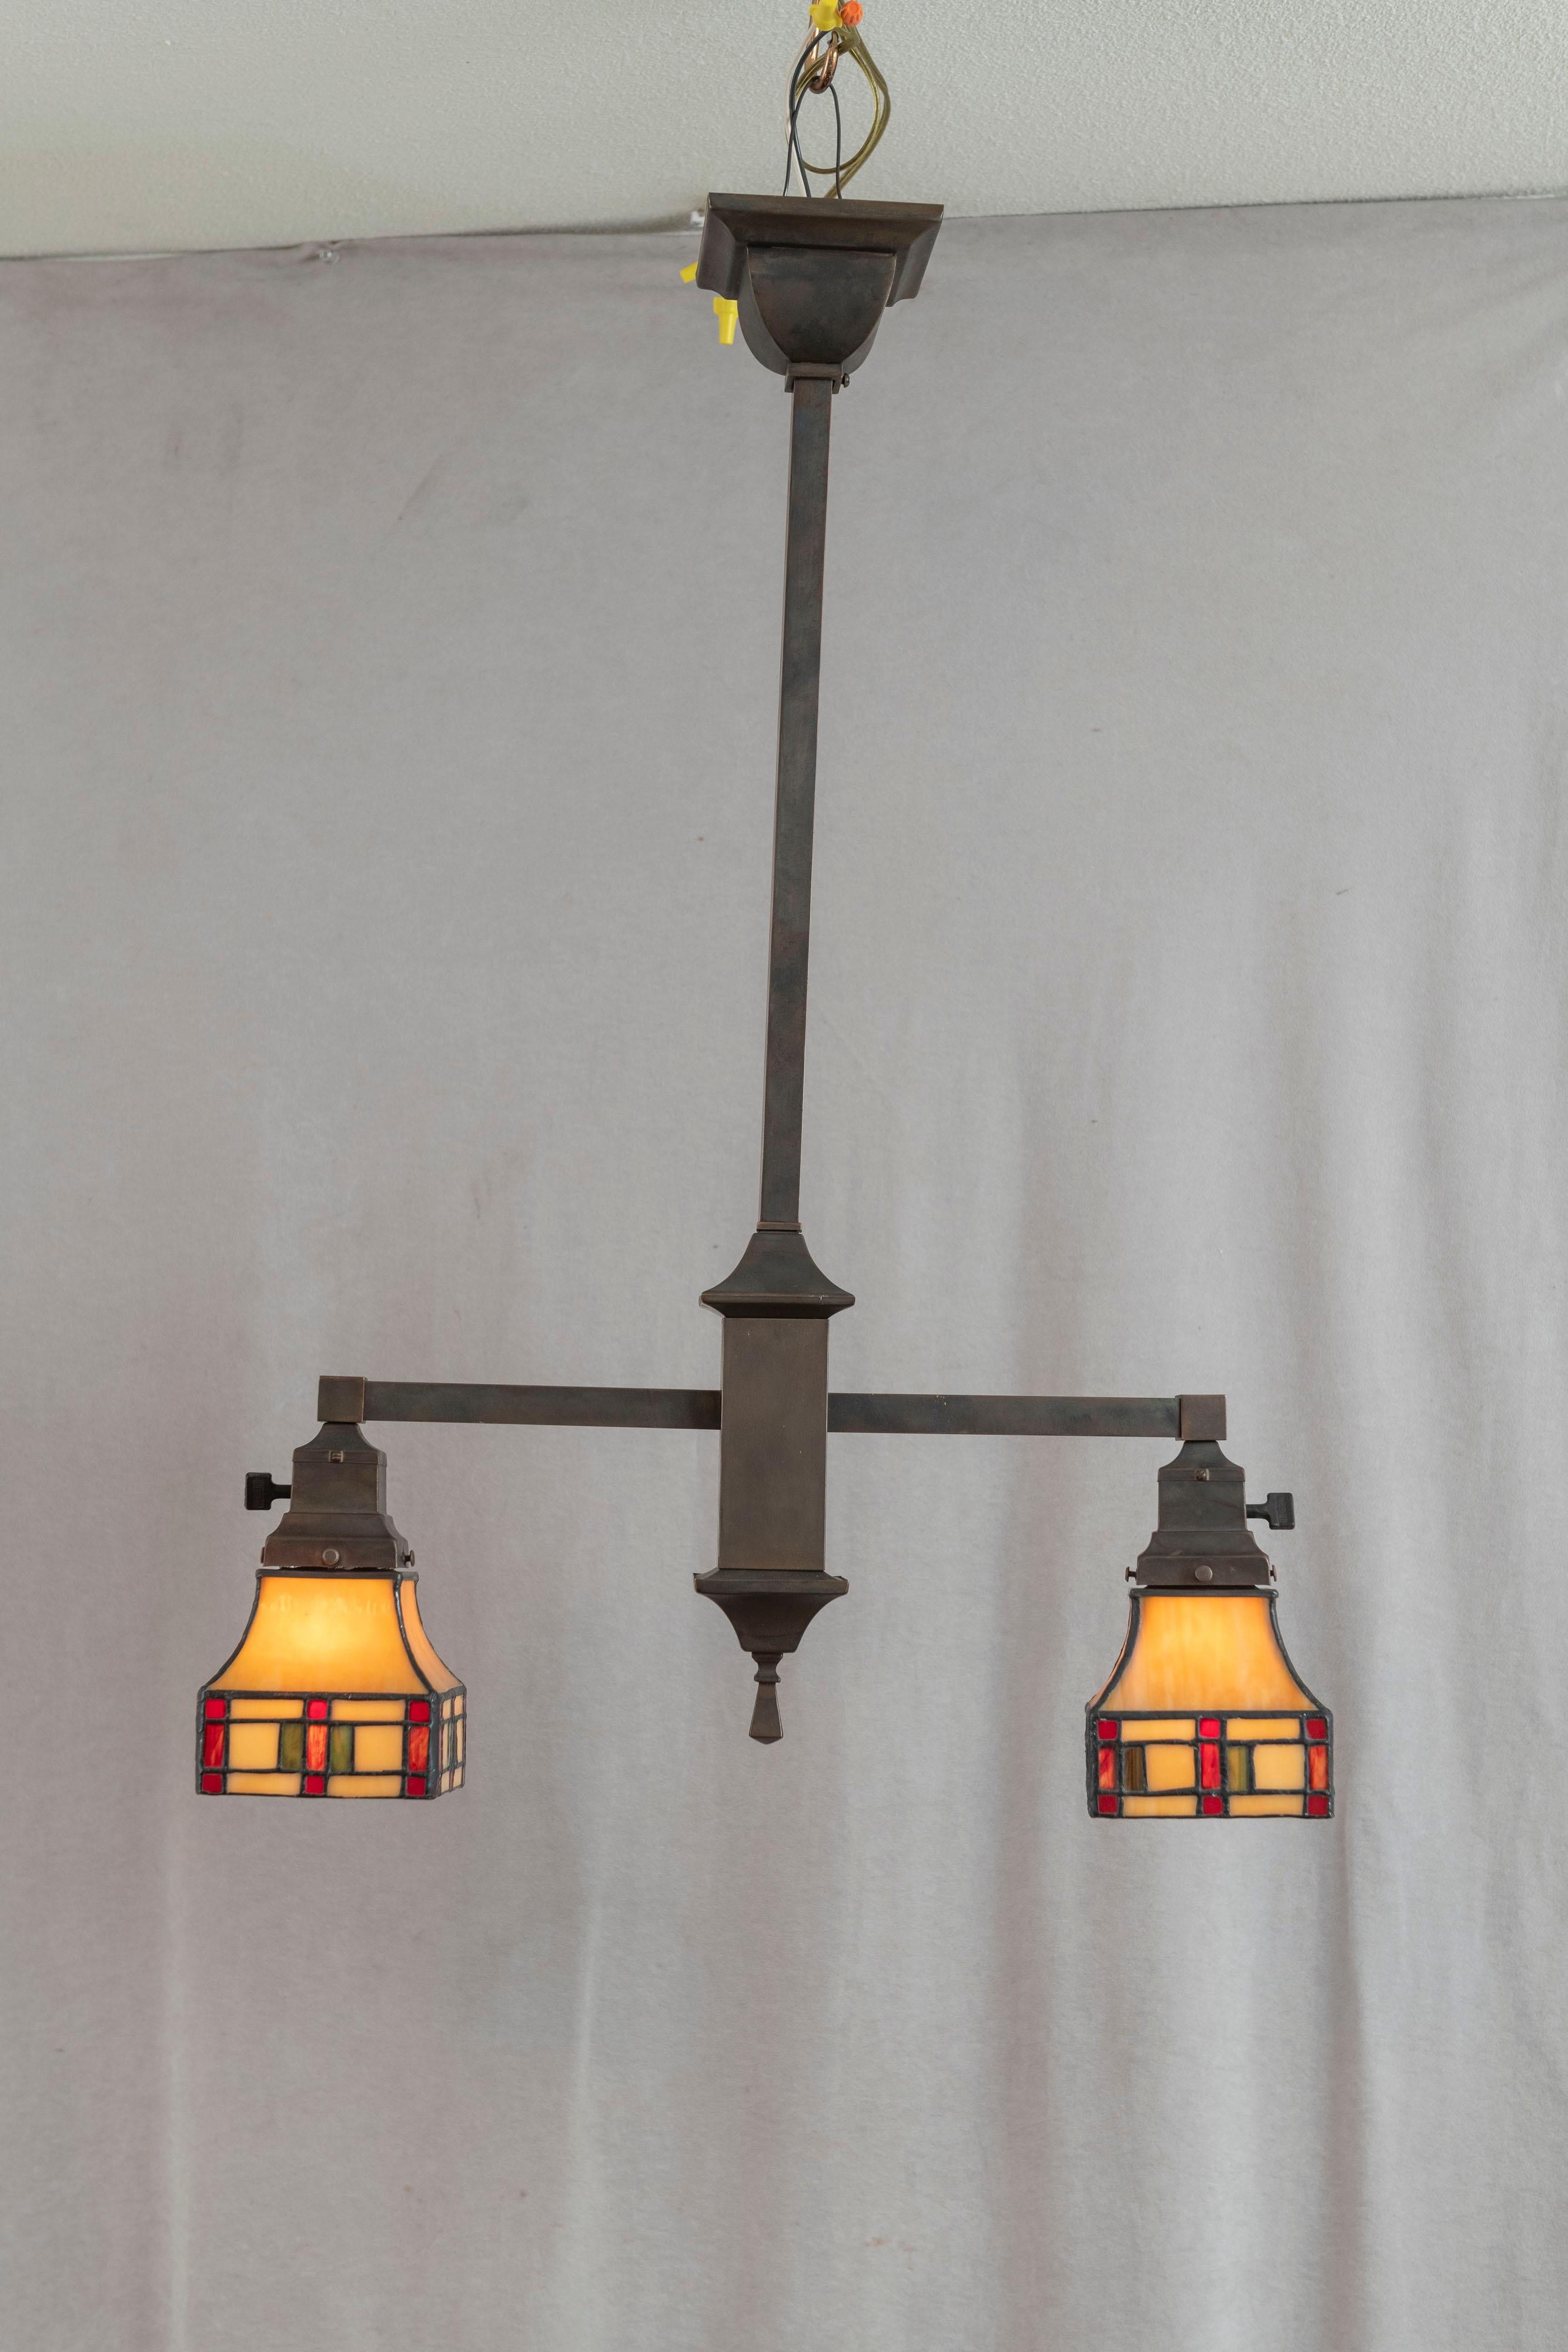 Hand-Crafted 2 Arm Arts & Crafts Chandelier w/ Original Leaded Glass Shades, ca. 1910